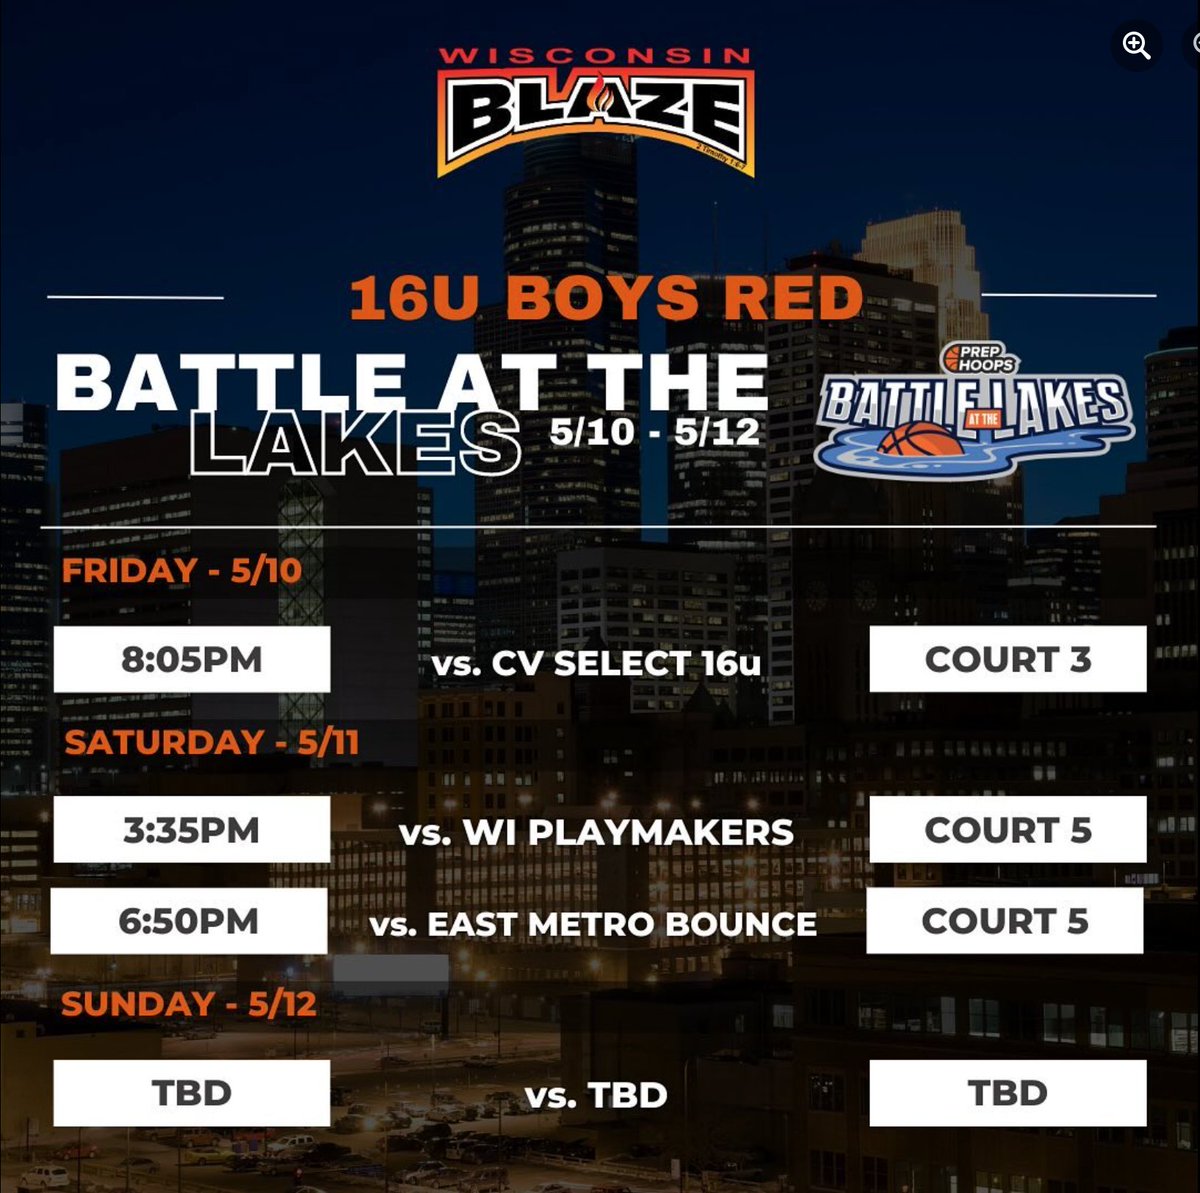 Here is a look at our 16U-17U boys teams' schedules for the Battle at the Lakes tourney this weekend! #wisconsinblaze #betheflame🔥🏀